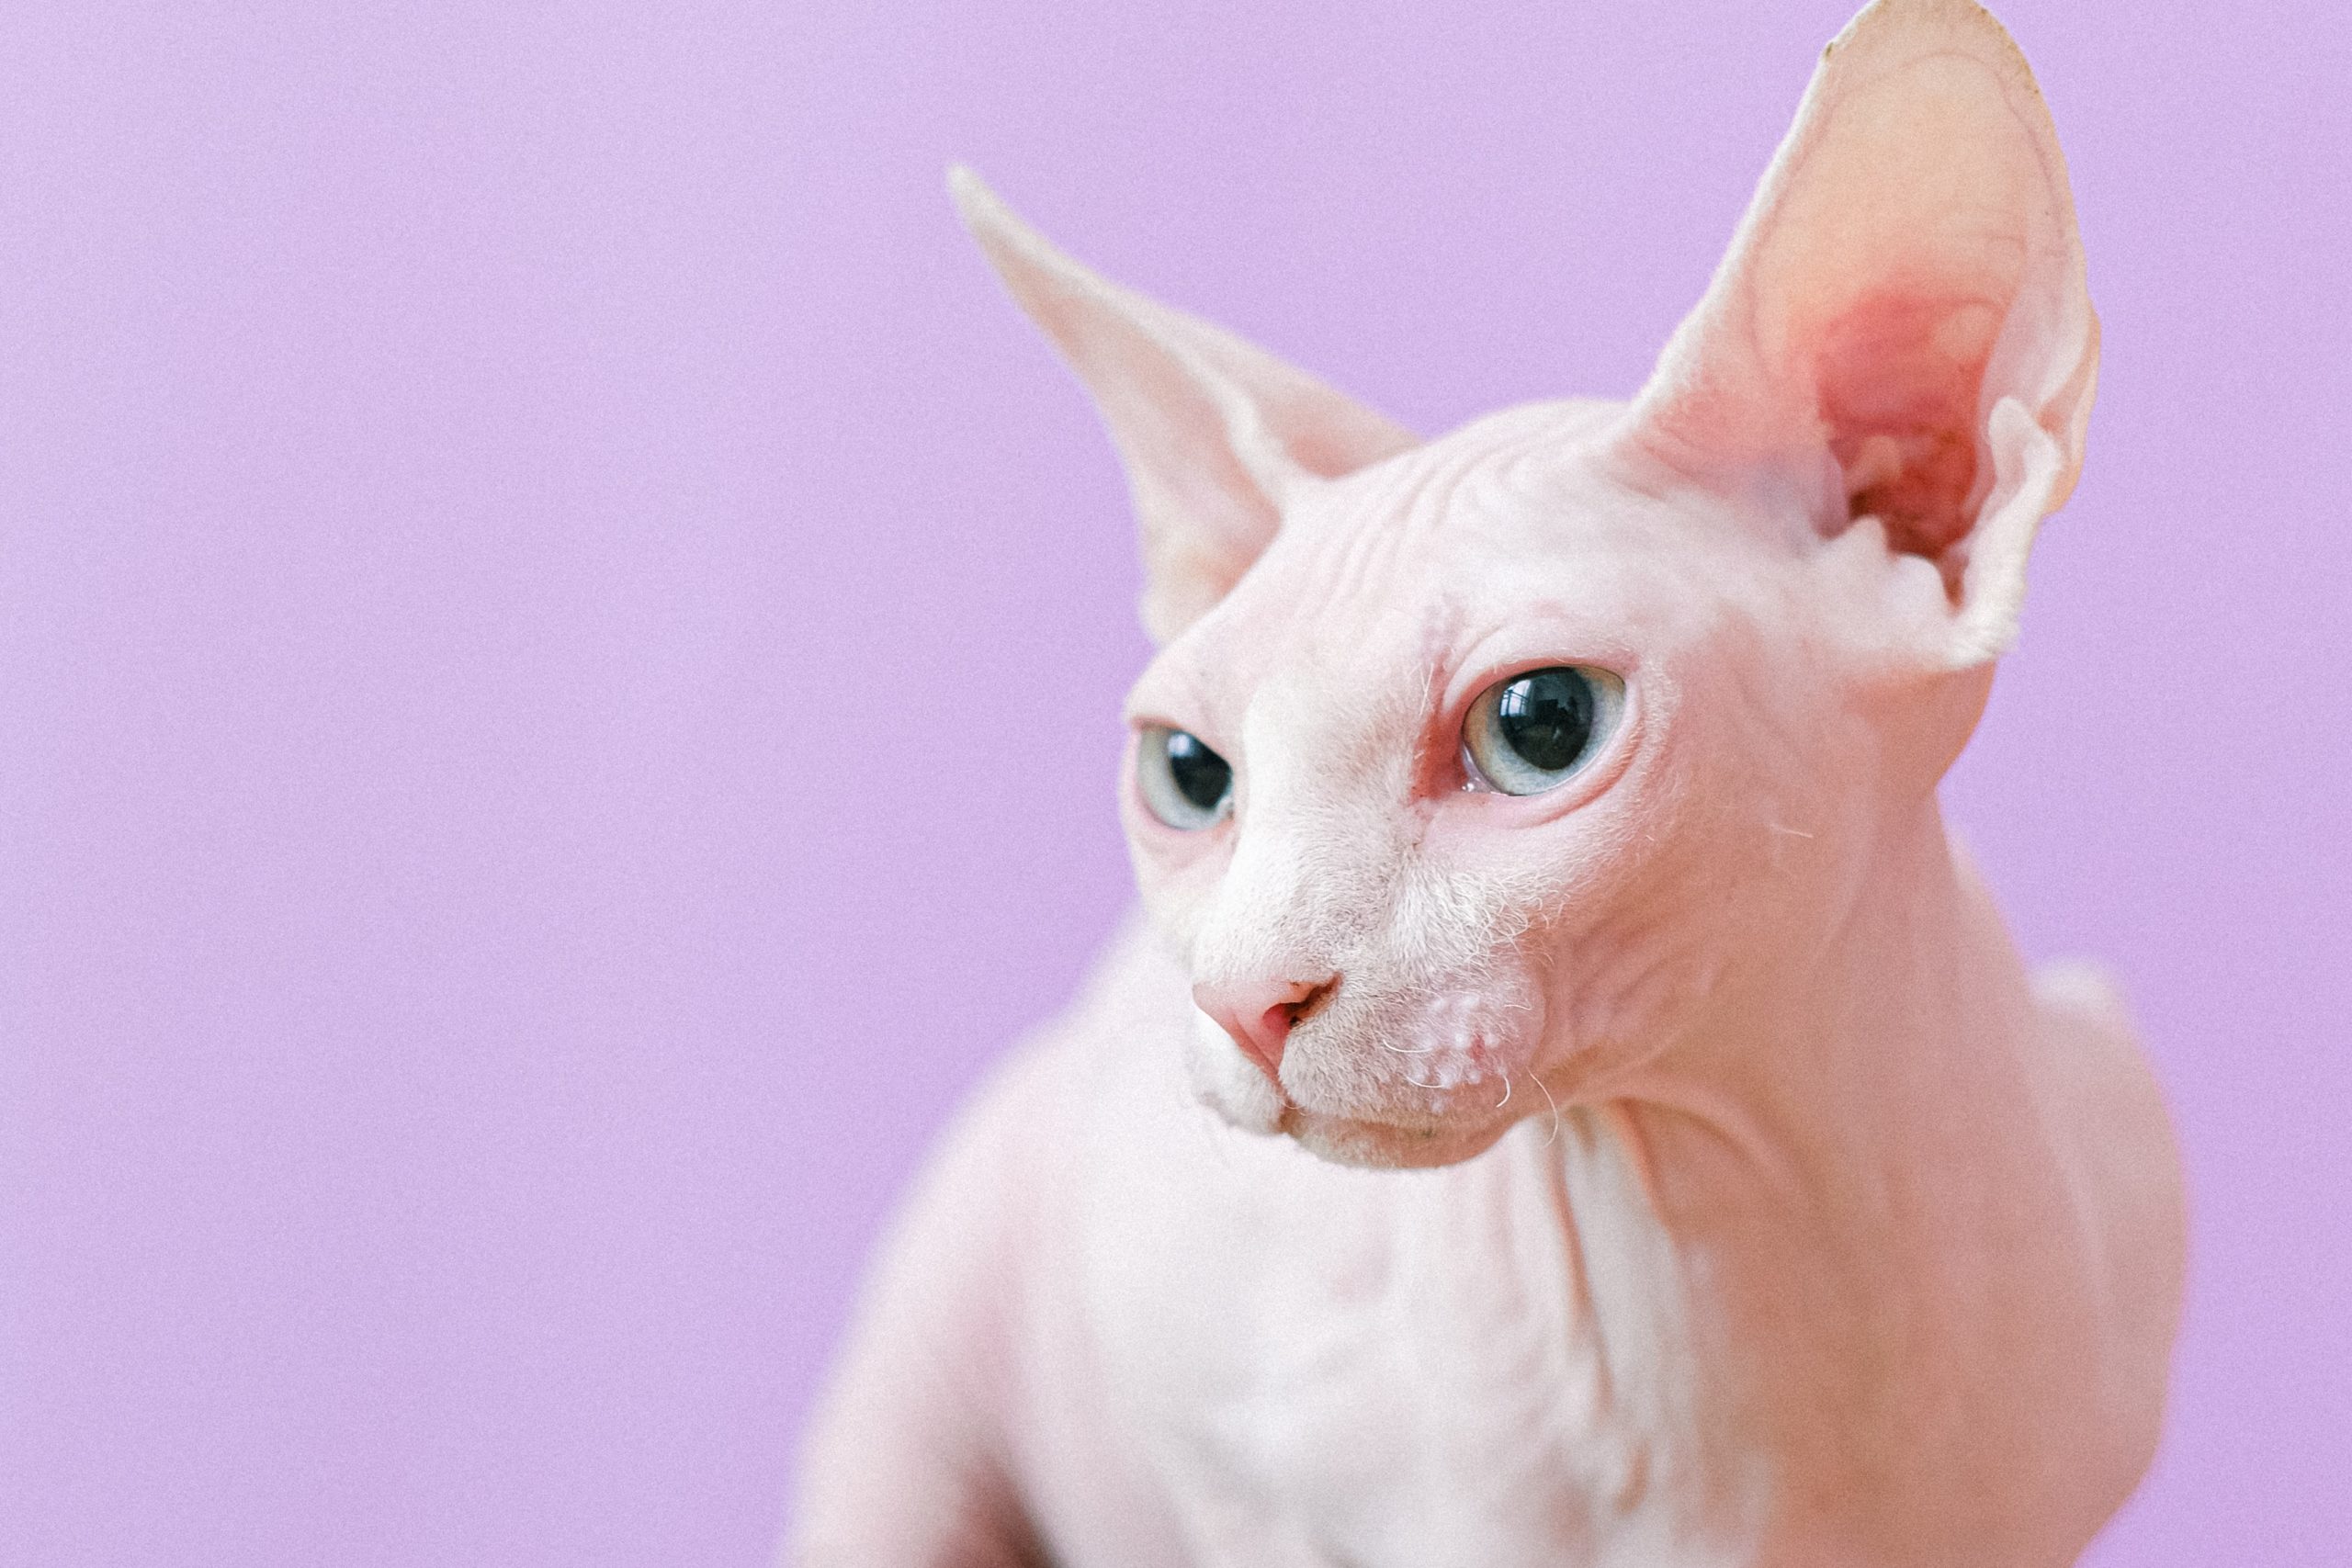 Hairless Sphynx cat with blue eyes stares to the left in front of a purple backdrop.